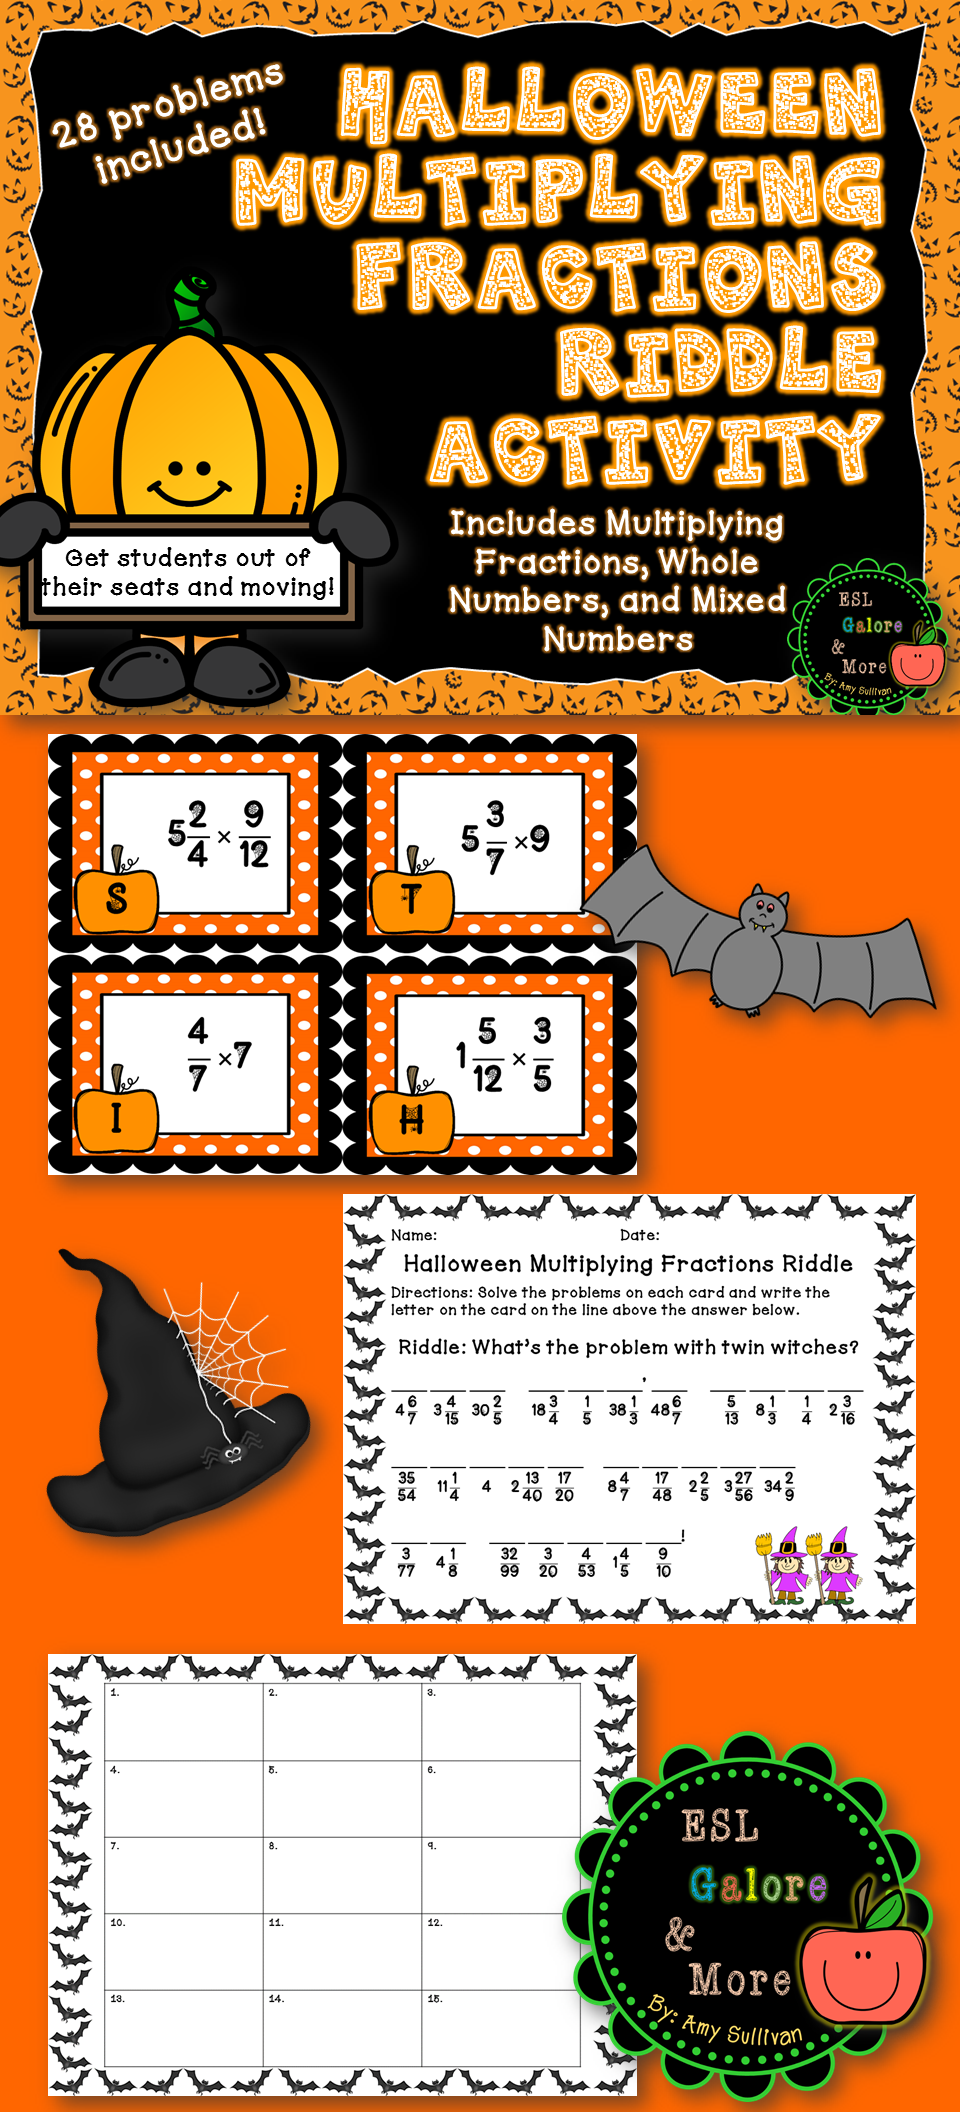 This Is A Great Activity For Students To Practice